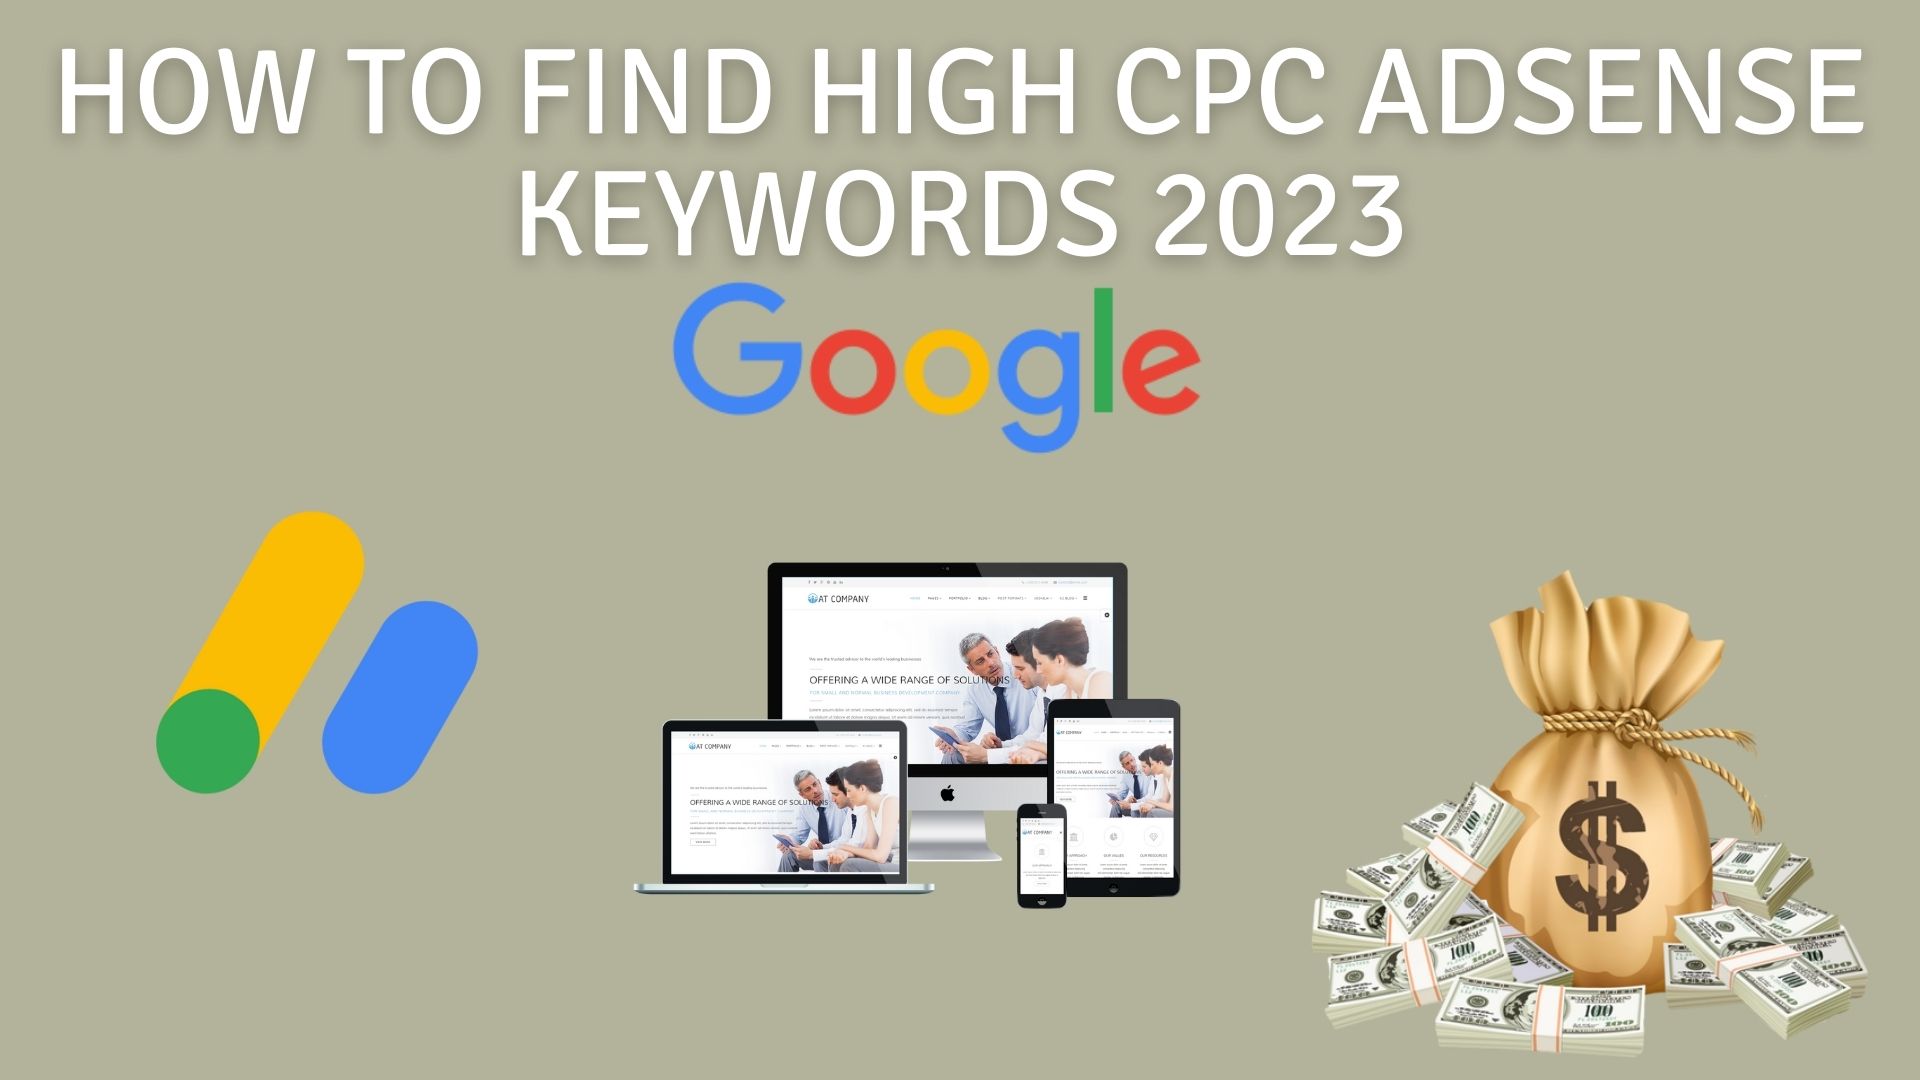 How to find high cpc adsense keywords 2023